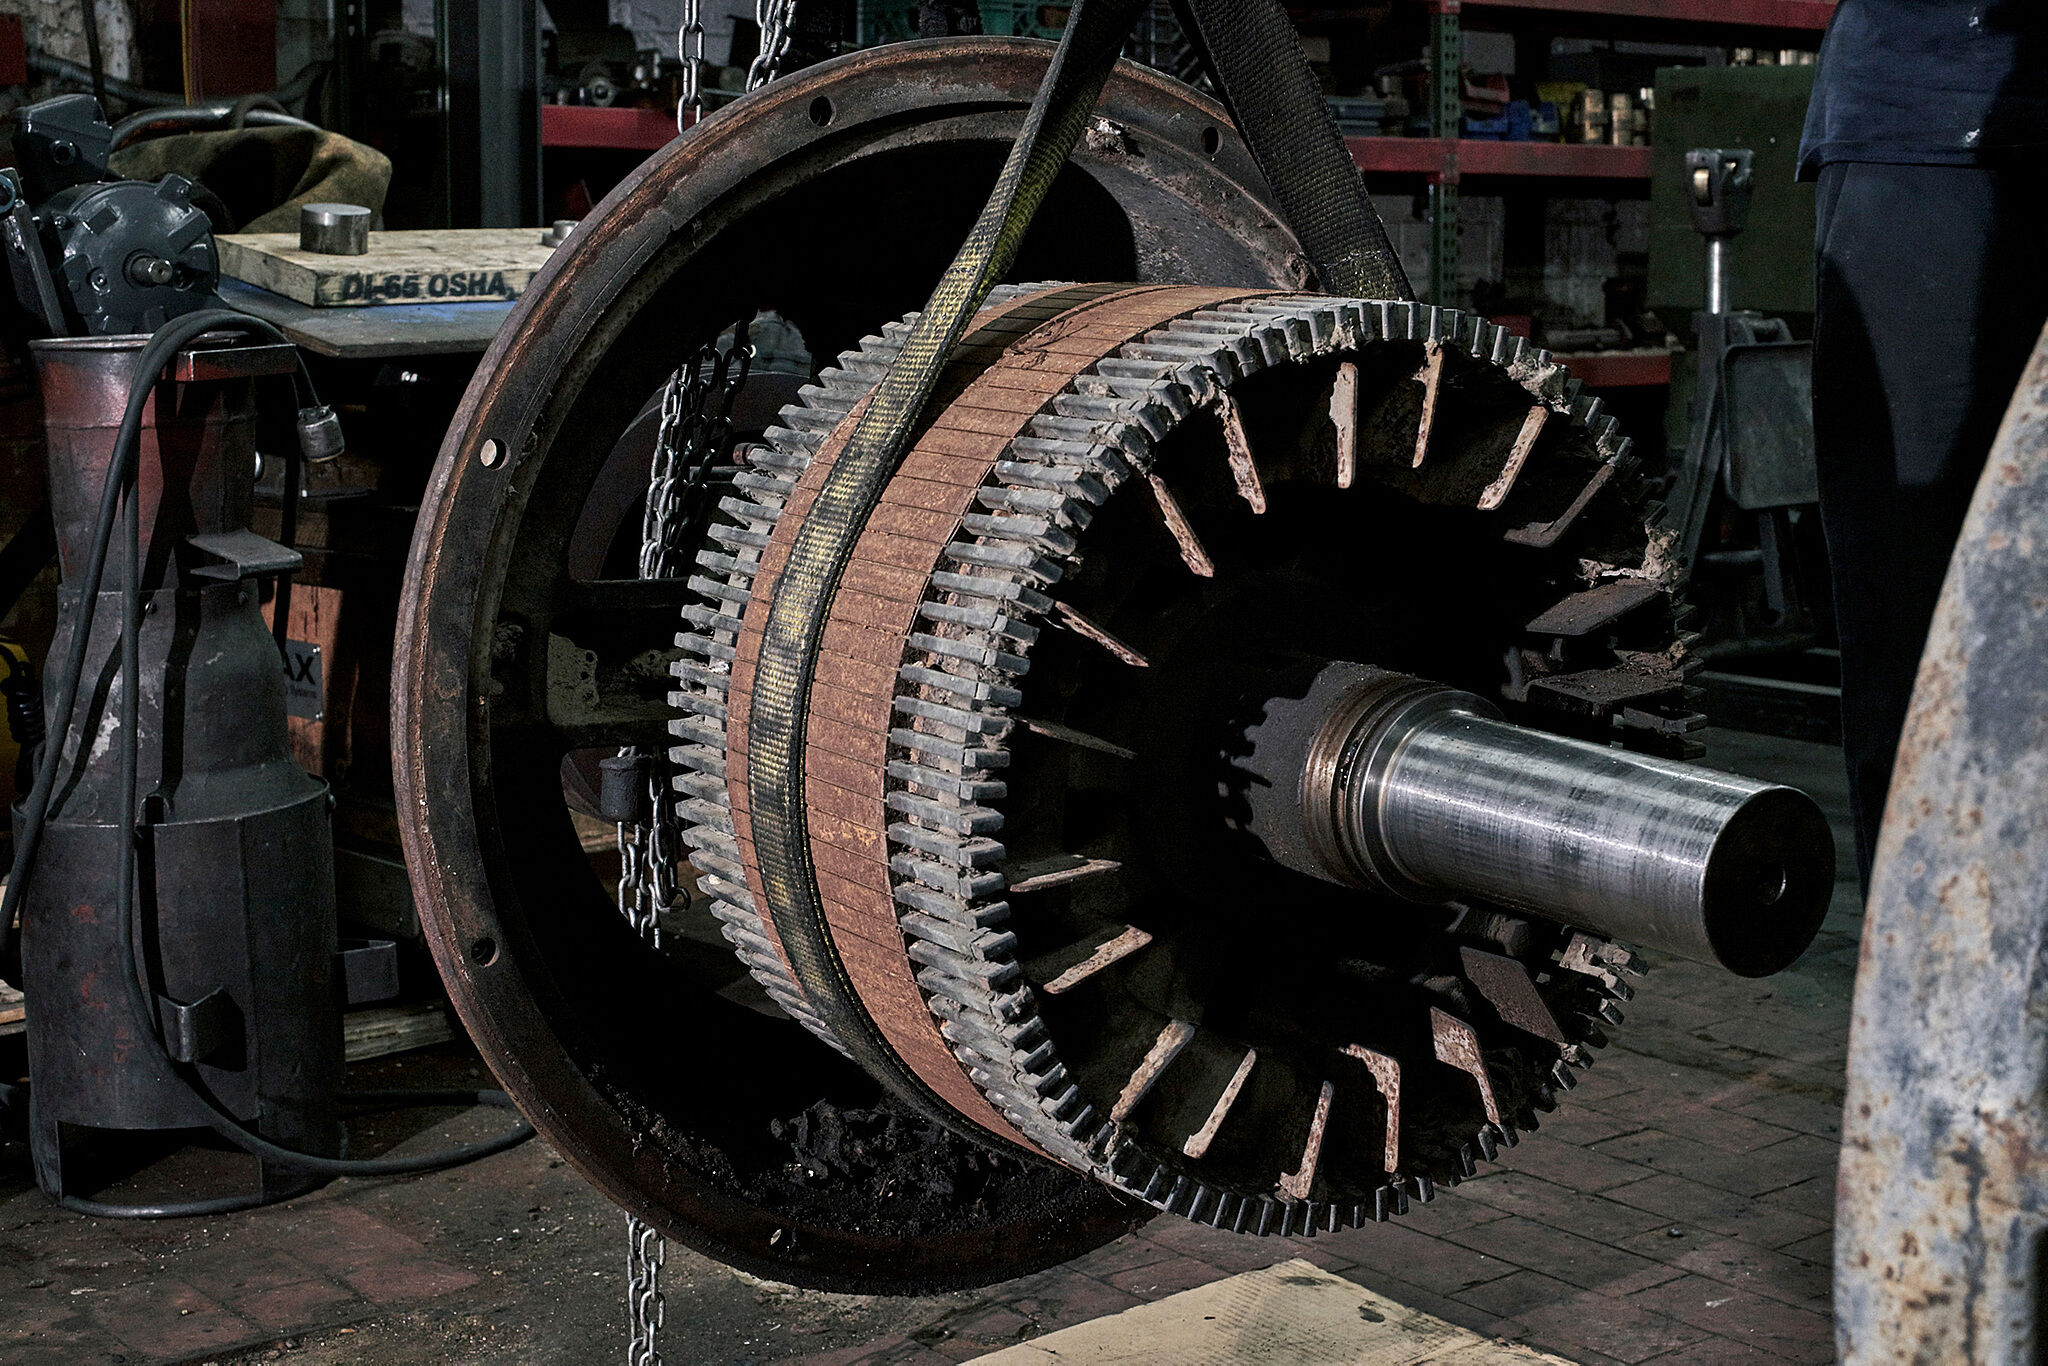 Photograph of a cotton gin motor being repaired